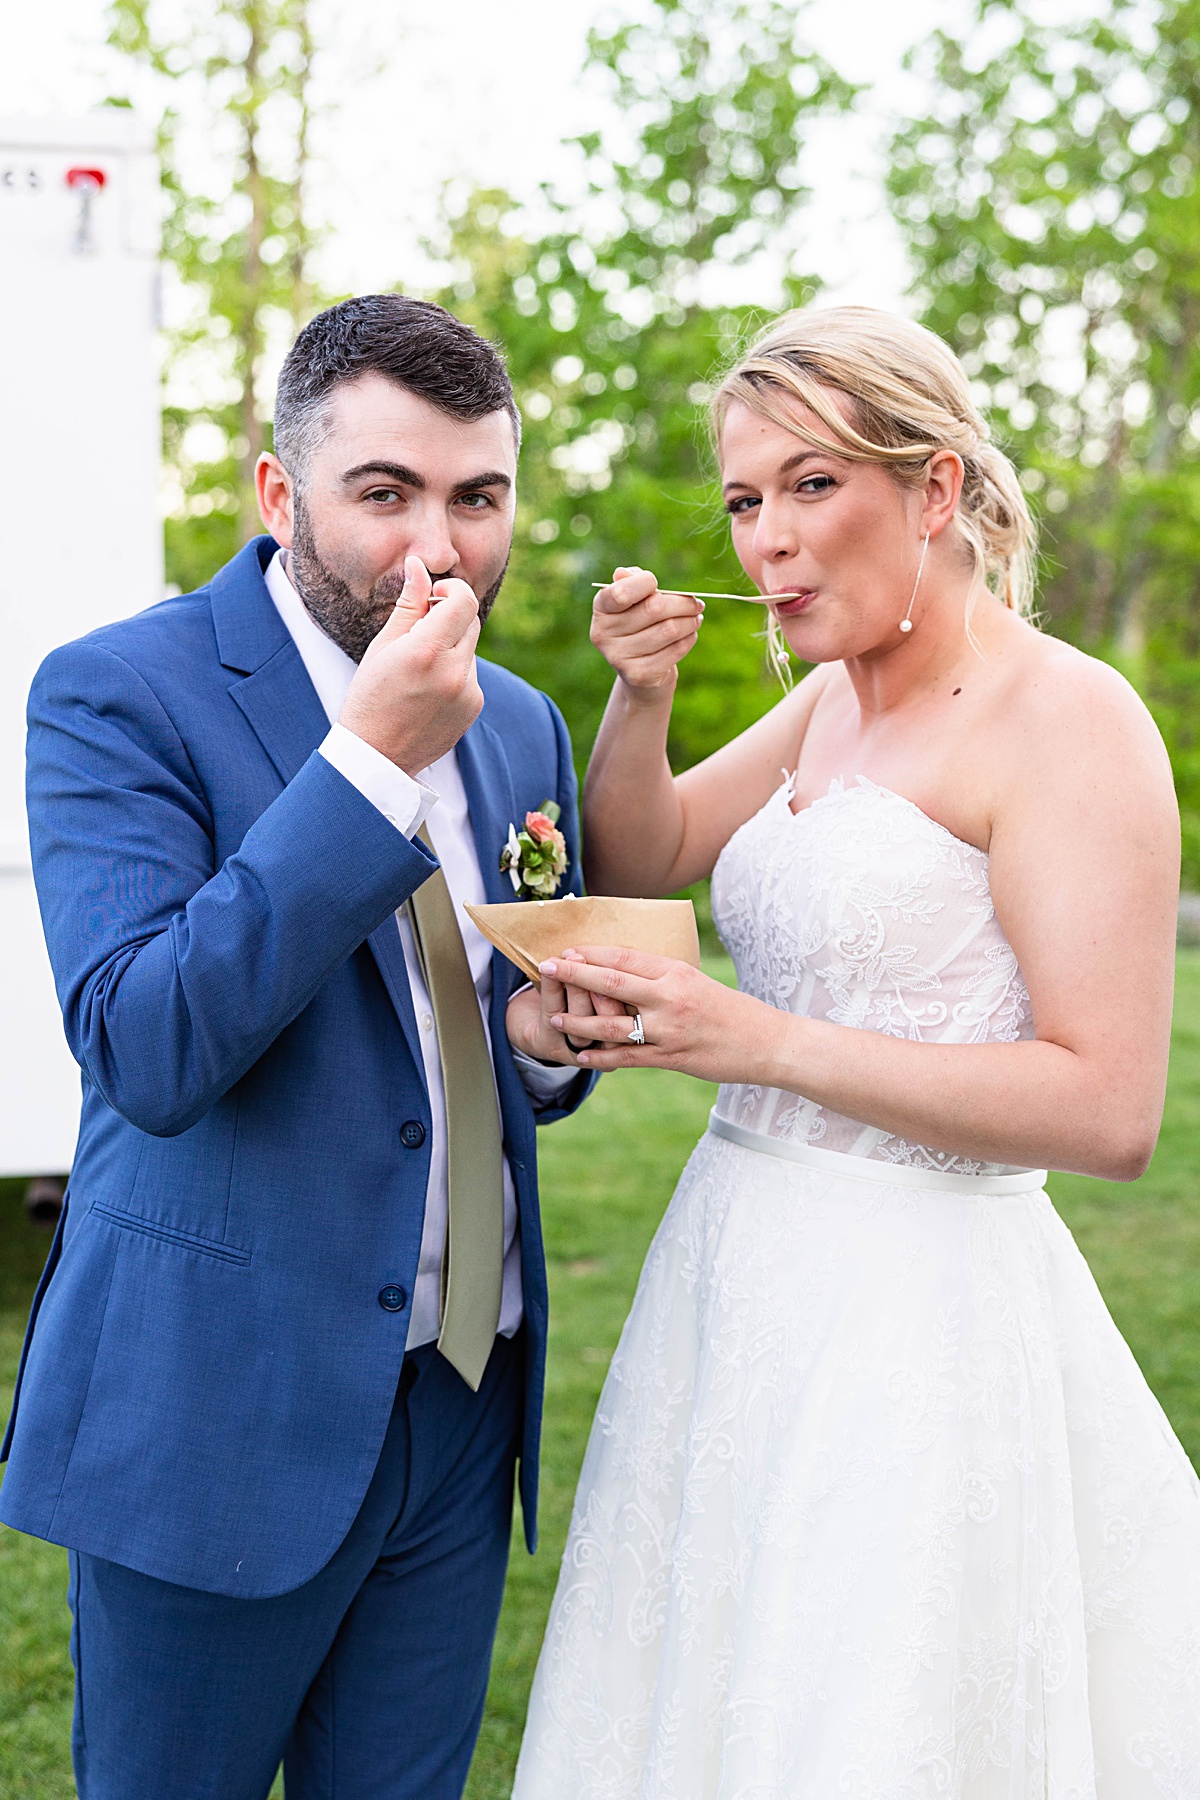 Rookies ice cream photos with the bride and groom for this rustic elegance Seclusion Wedding in Lexington, Virginia.